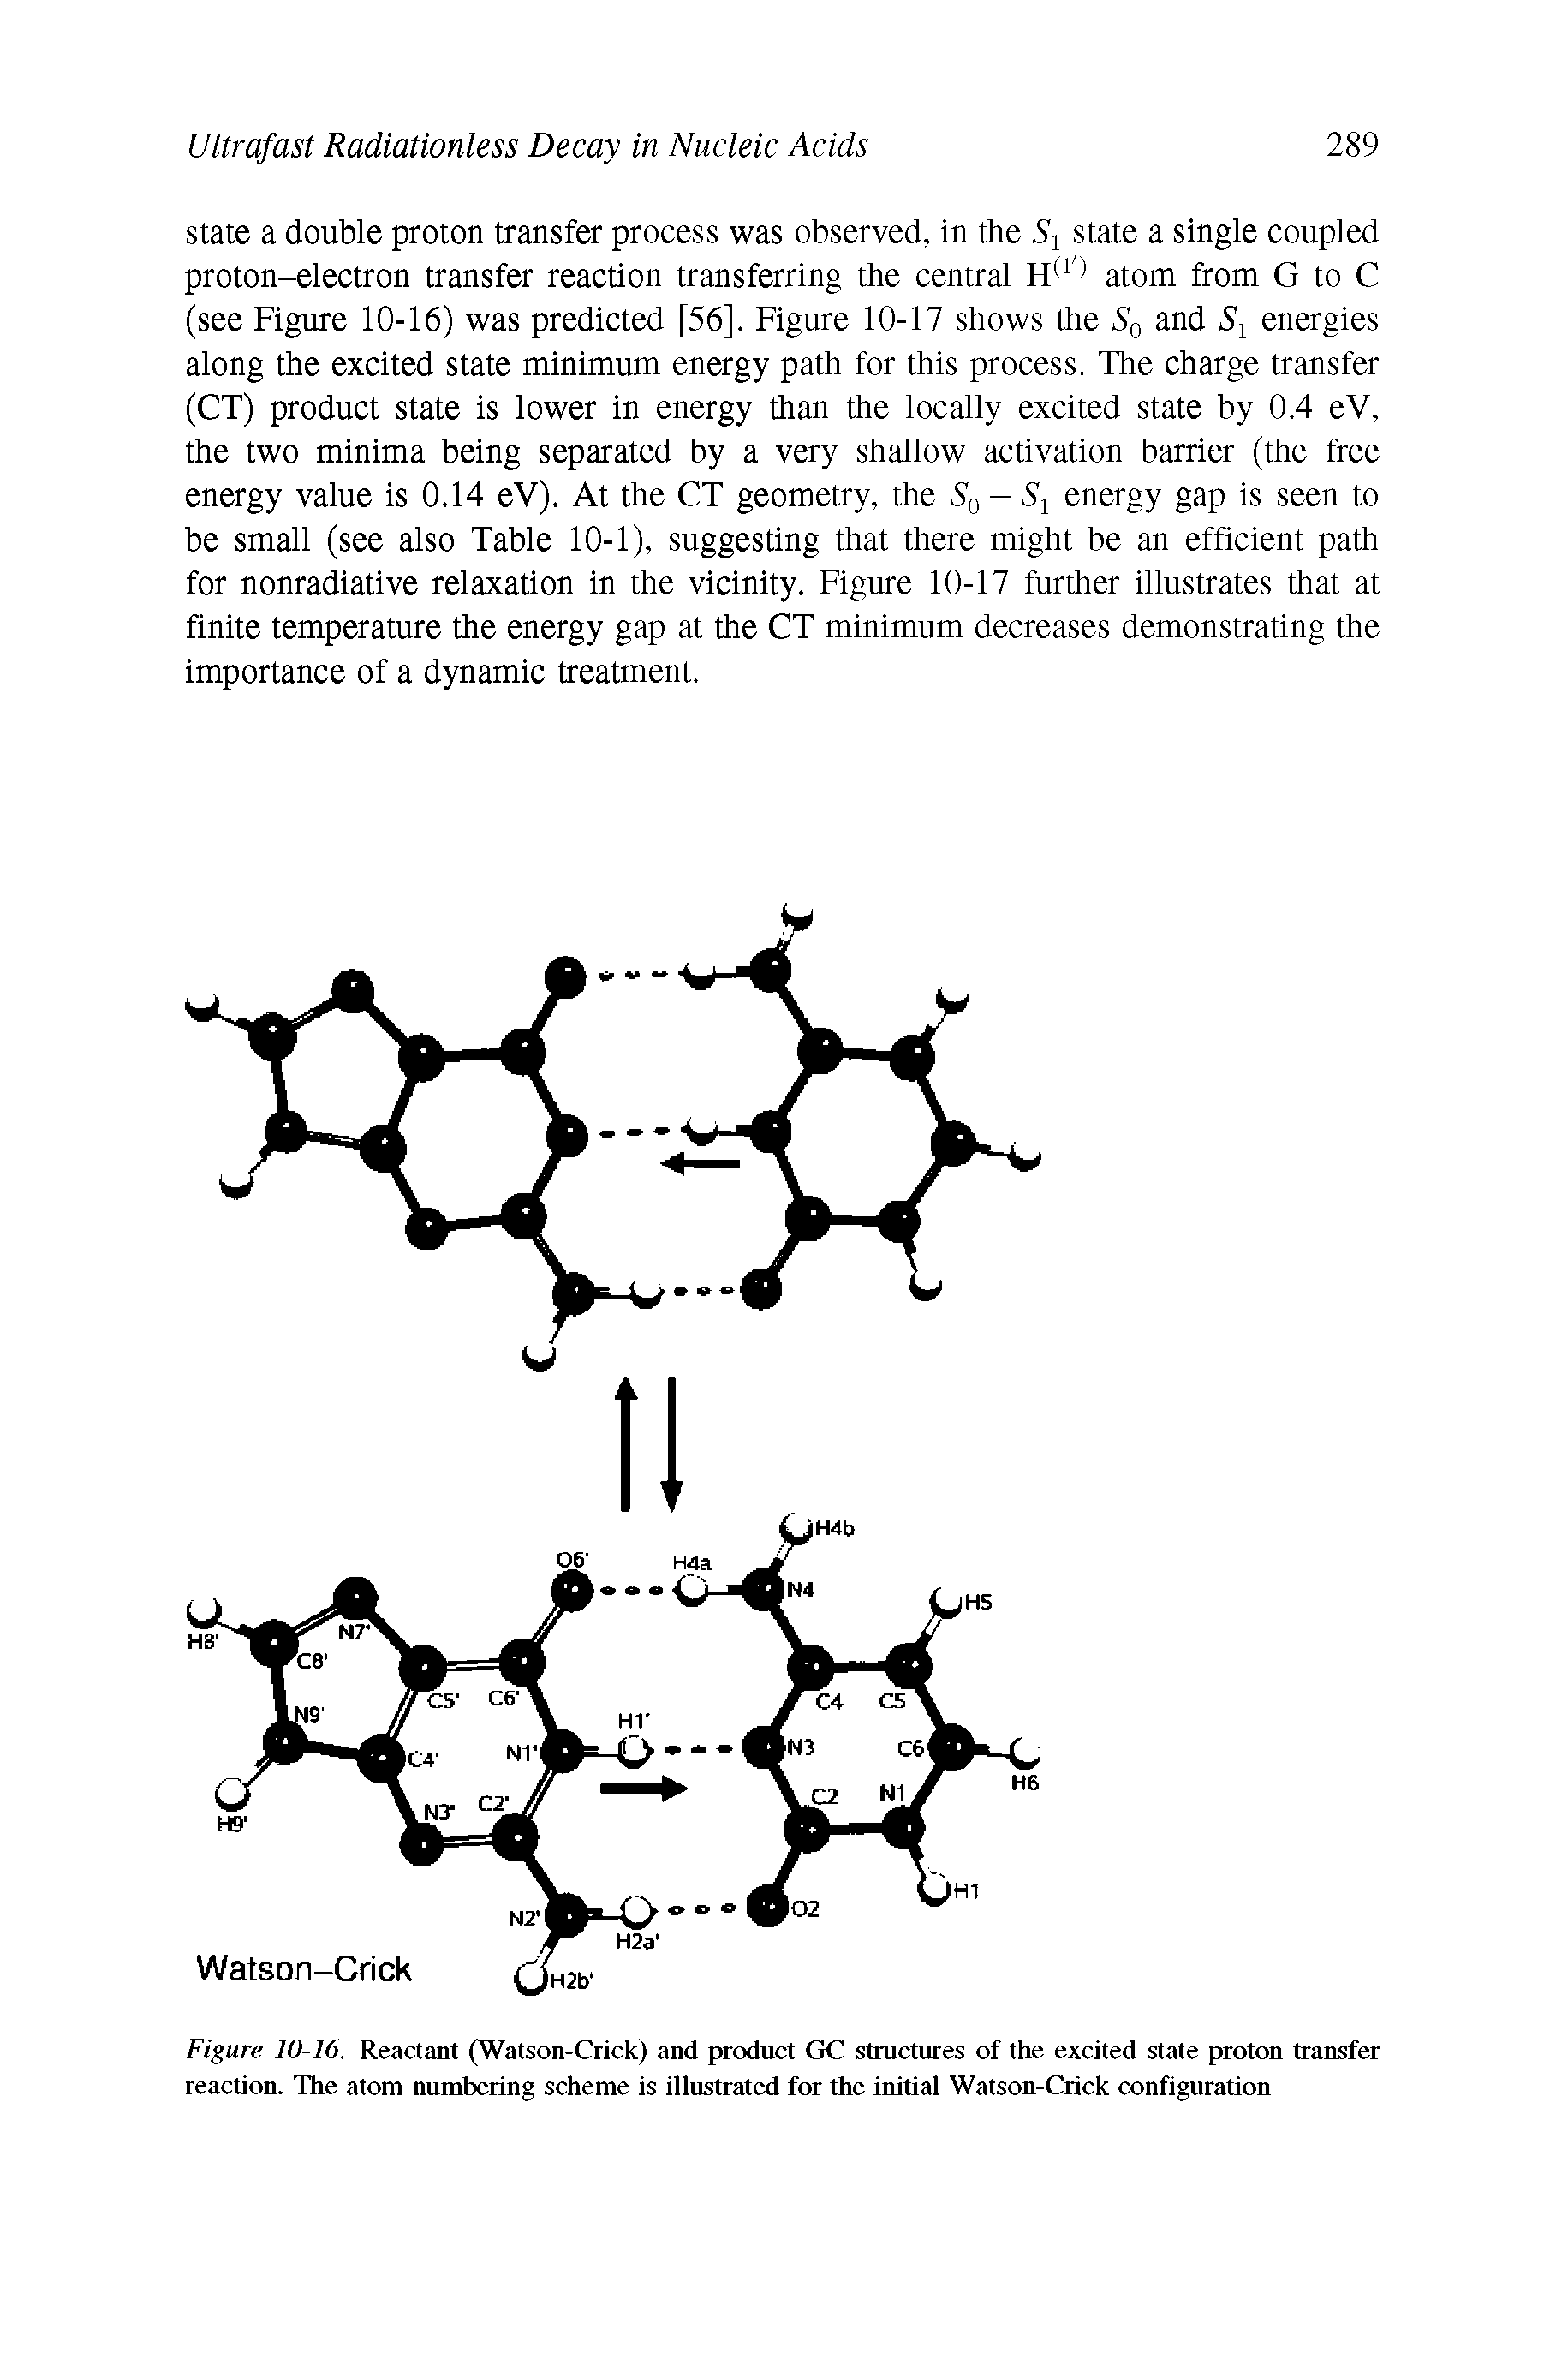 Figure 10-16. Reactant (Watson-Crick) and product GC structures of the excited state proton transfer reaction. The atom numbering scheme is illustrated for the initial Watson-Crick configuration...